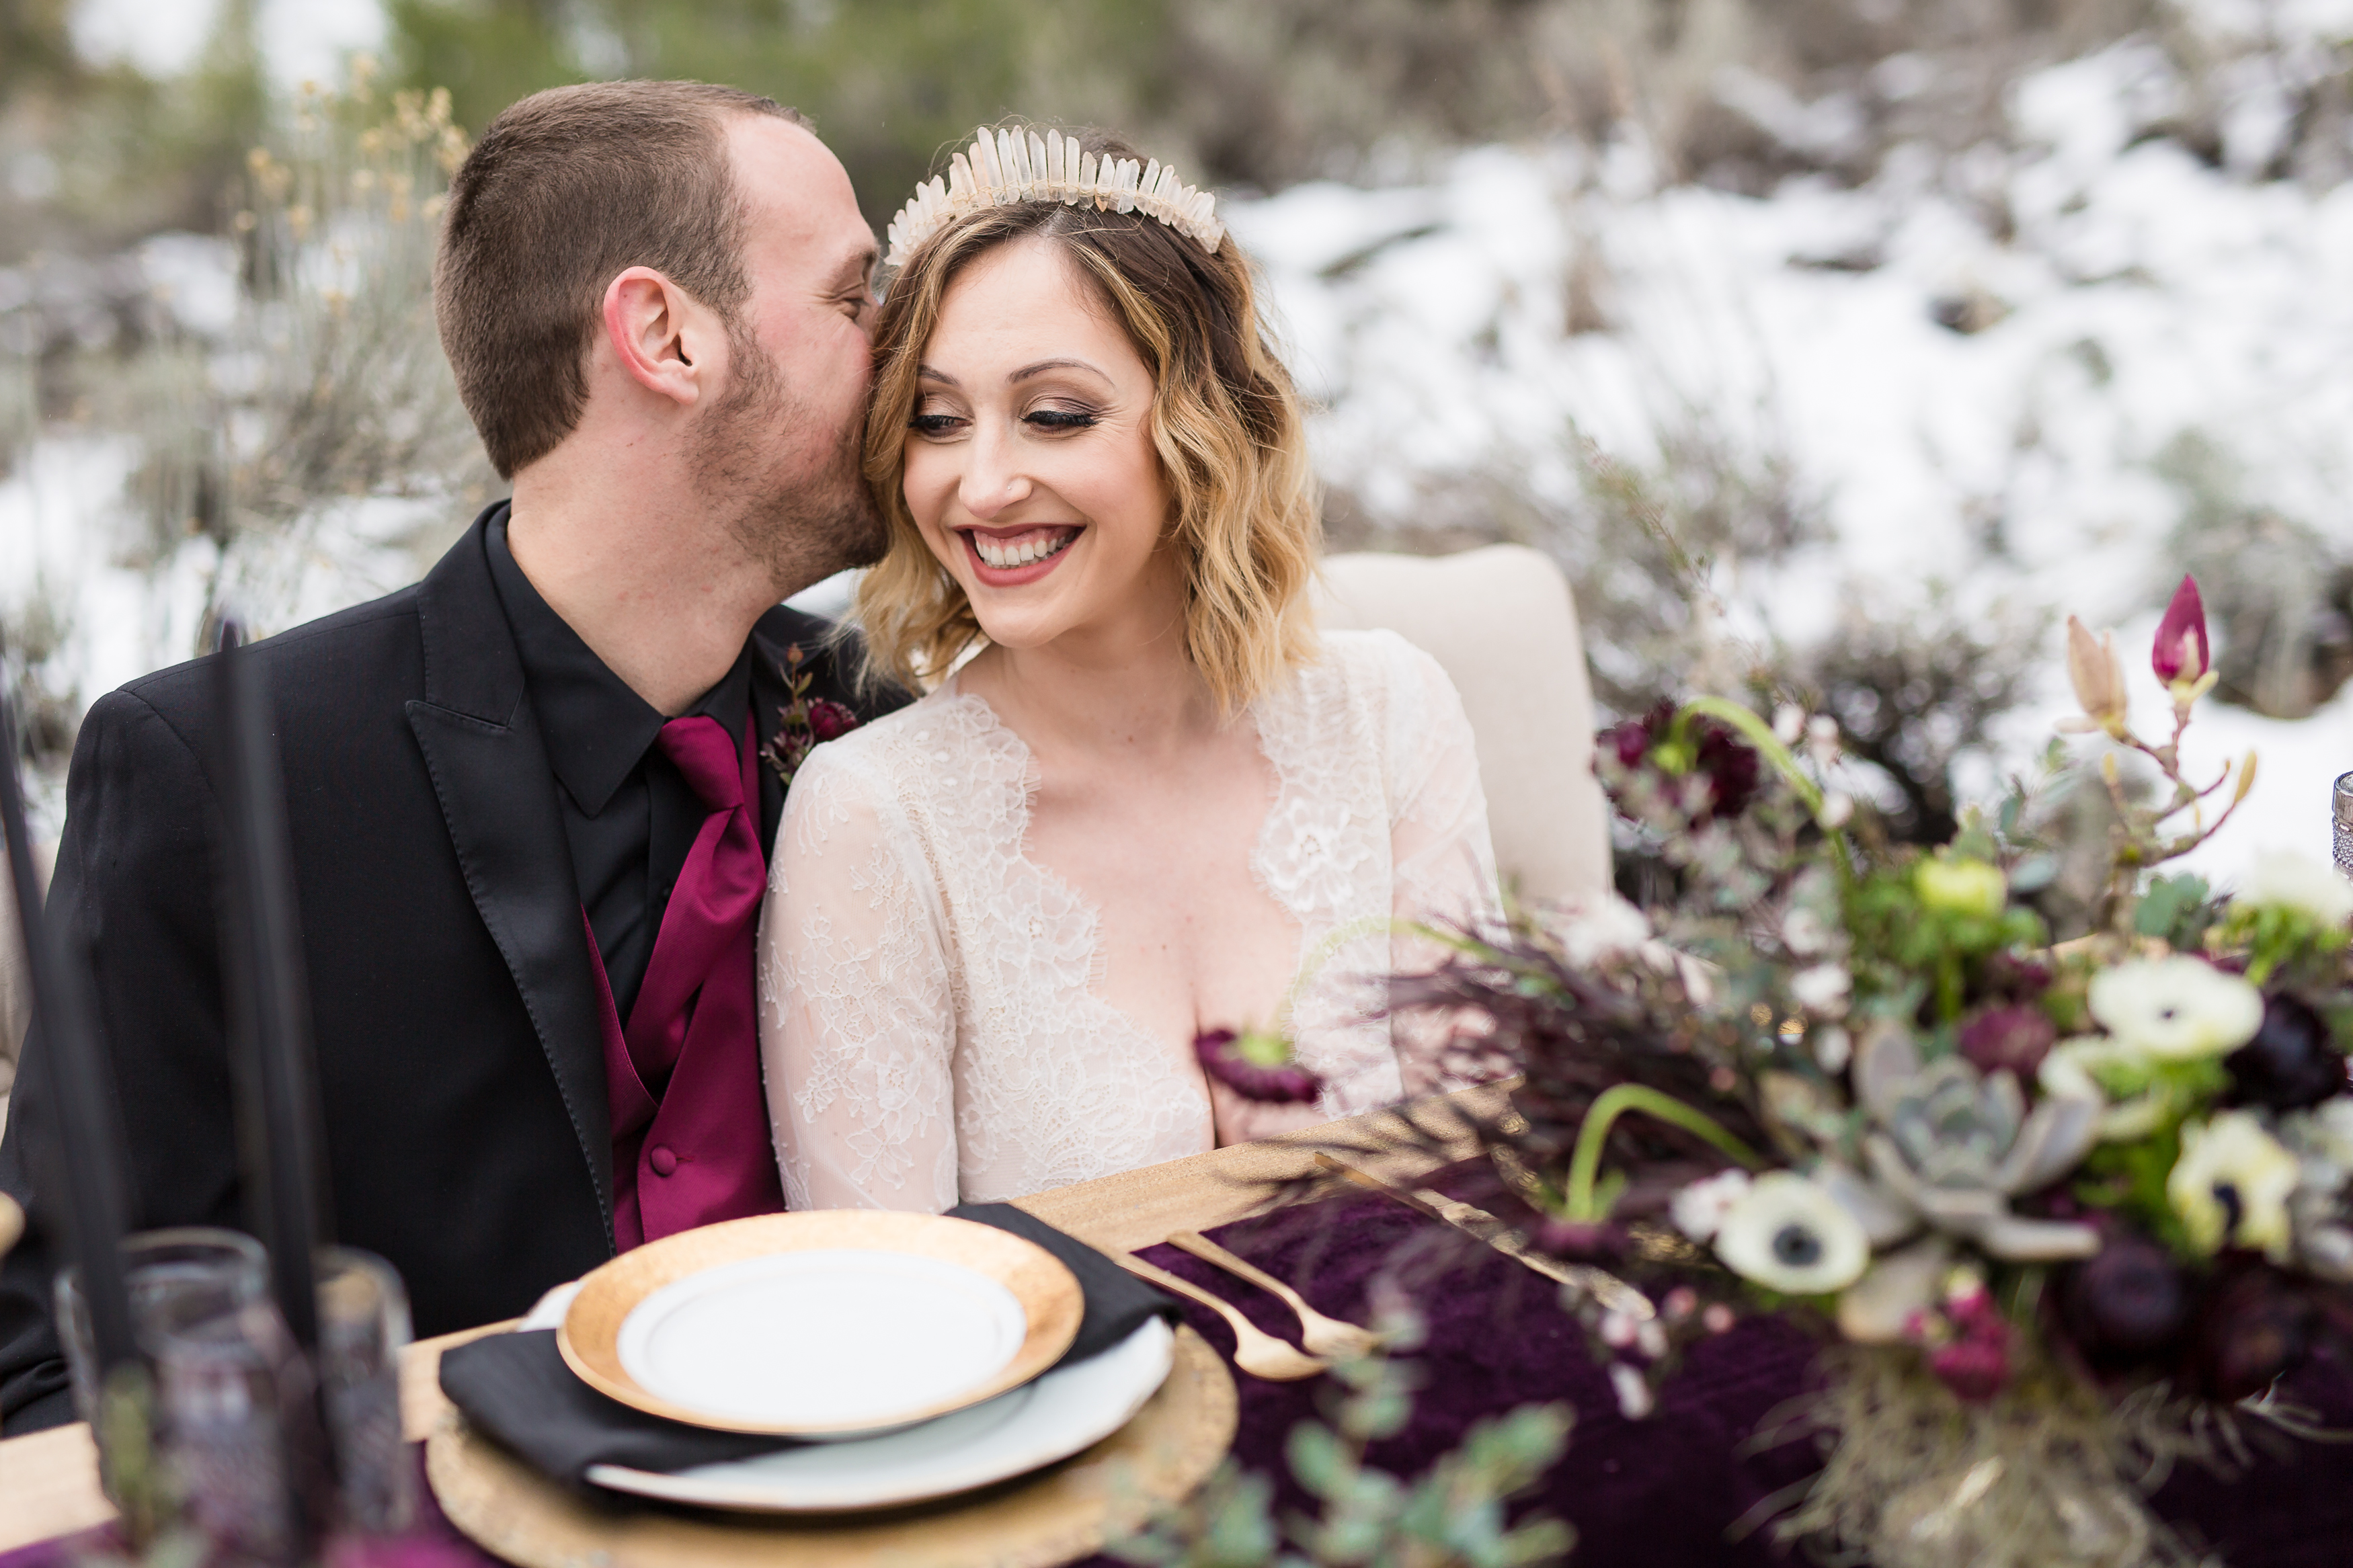 Groom whispering in bride's ear at reception table in winter